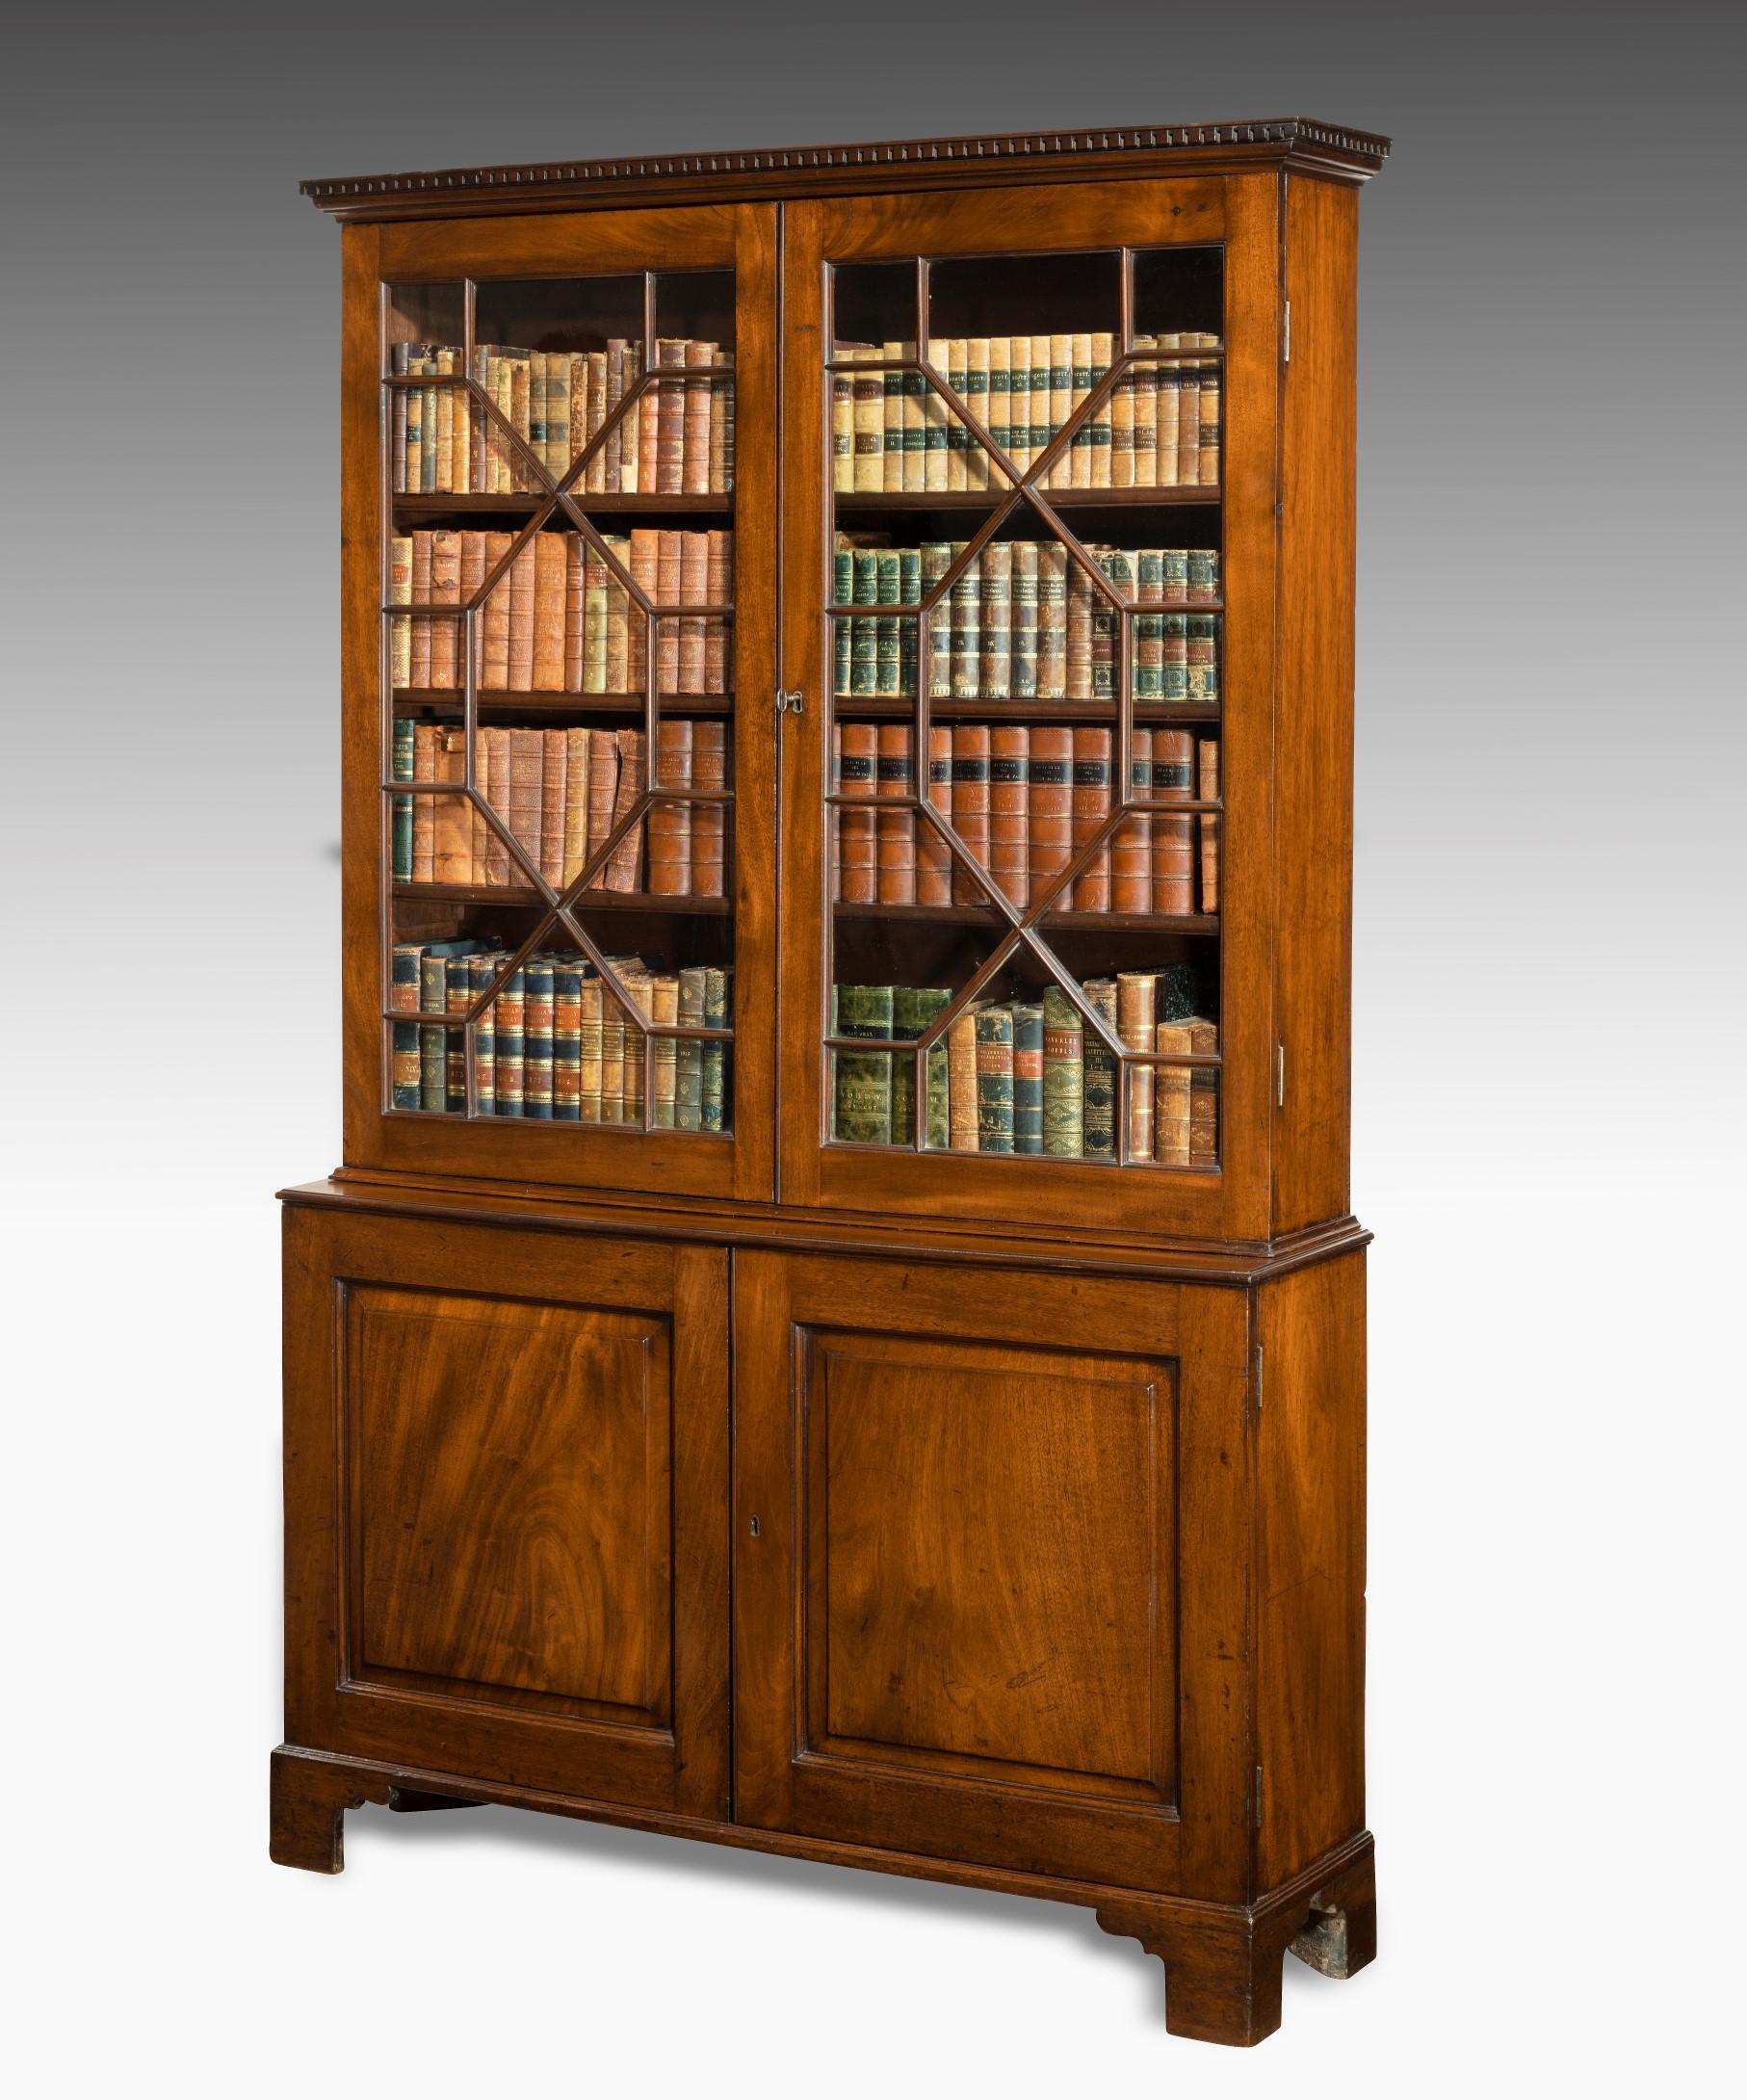 A George III Chippendale period mahogany cupboard base bookcase; the bookcase's dentil moulded cornice above a pair of thirteen pane astragal glazed doors which open to reveal fully adjustable bookshelves; below is a pair of fielded panel cupboard